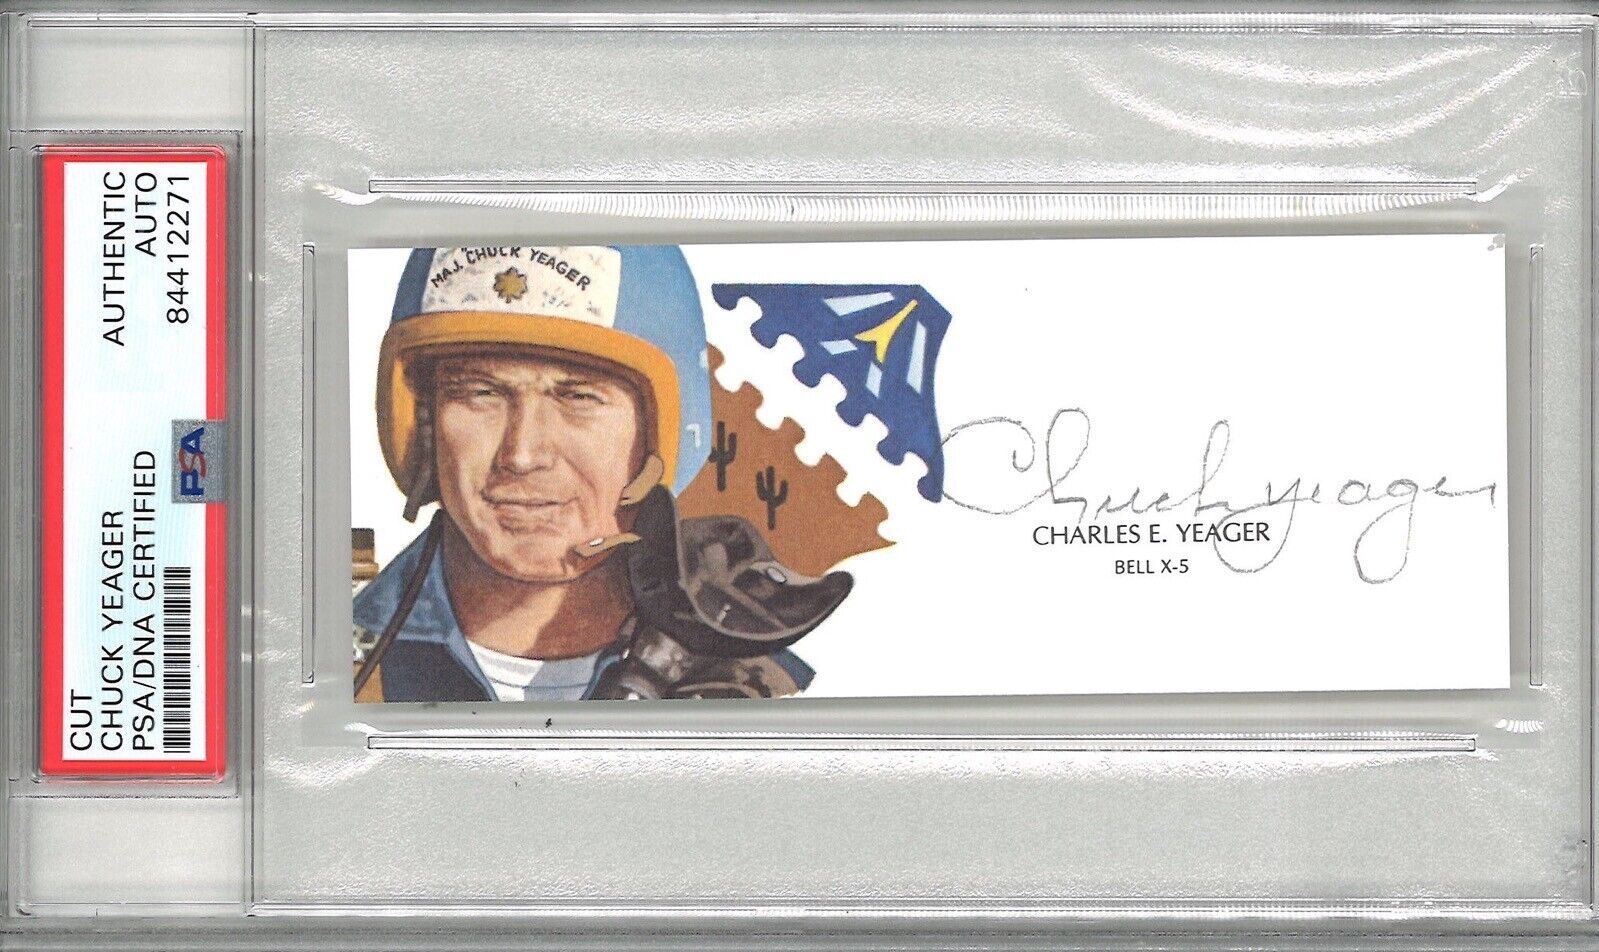 CHUCK YEAGER SIGNED CUT SIGNATURE PSA DNA 84412271 (D) WWII ACE TEST PILOT